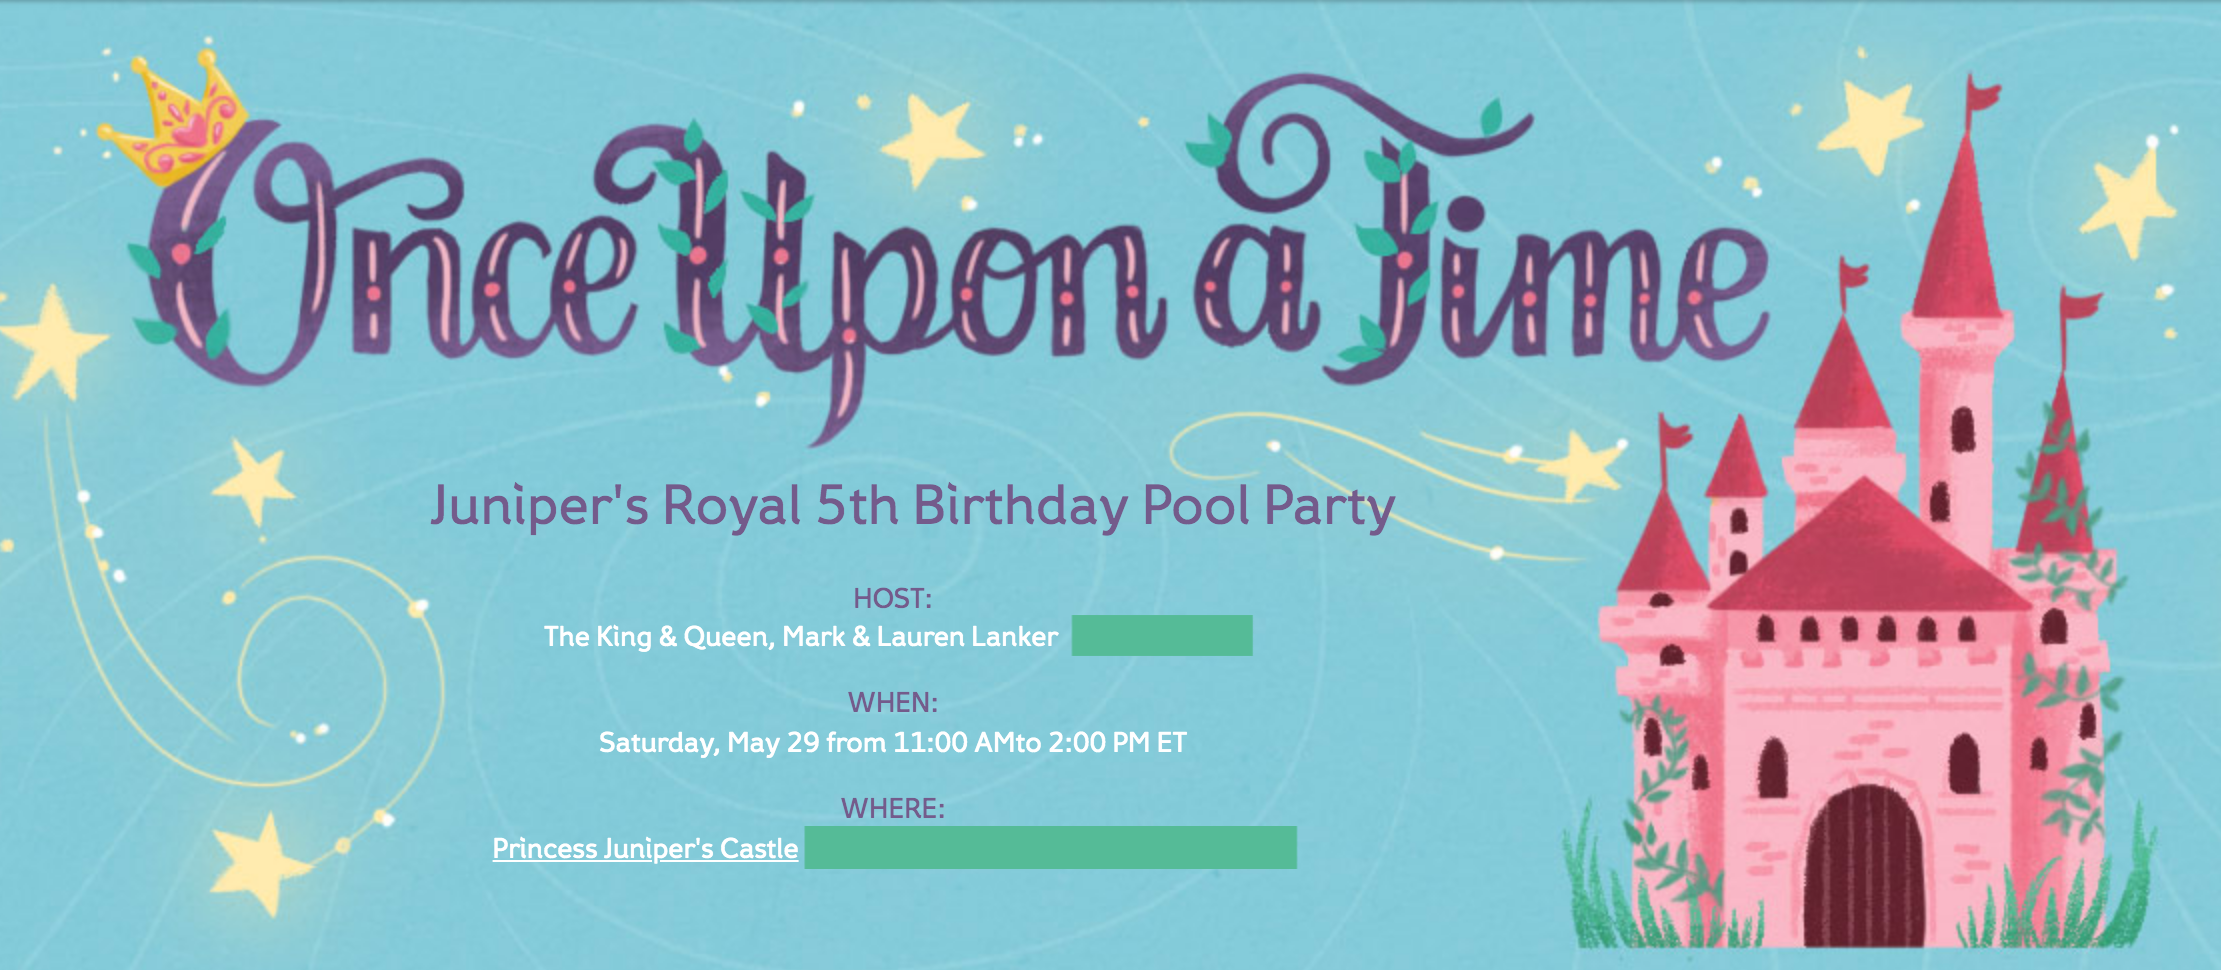 Juniper's "Princesses & Knights" 5th Birthday Pool Party & Royal Golden Birthday Celebration | Creative party ideas via thinkingcloset.com - I love putting my own creative touch on Evites with punny party details!